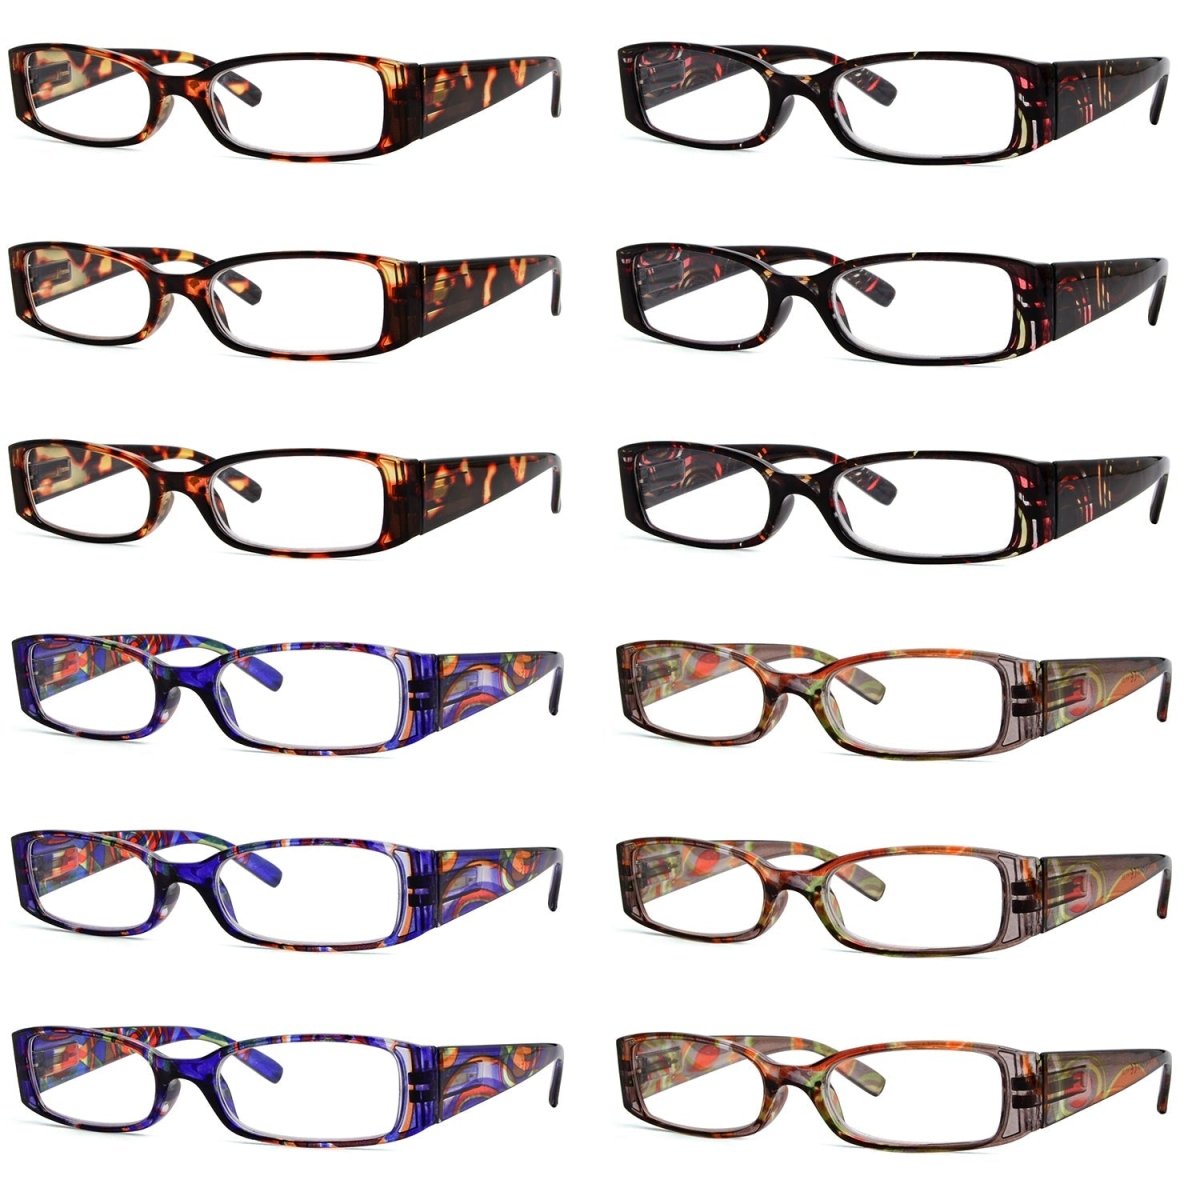 12 Pack Fashion Pattern Arms Reading Glasses R040Geyekeeper.com